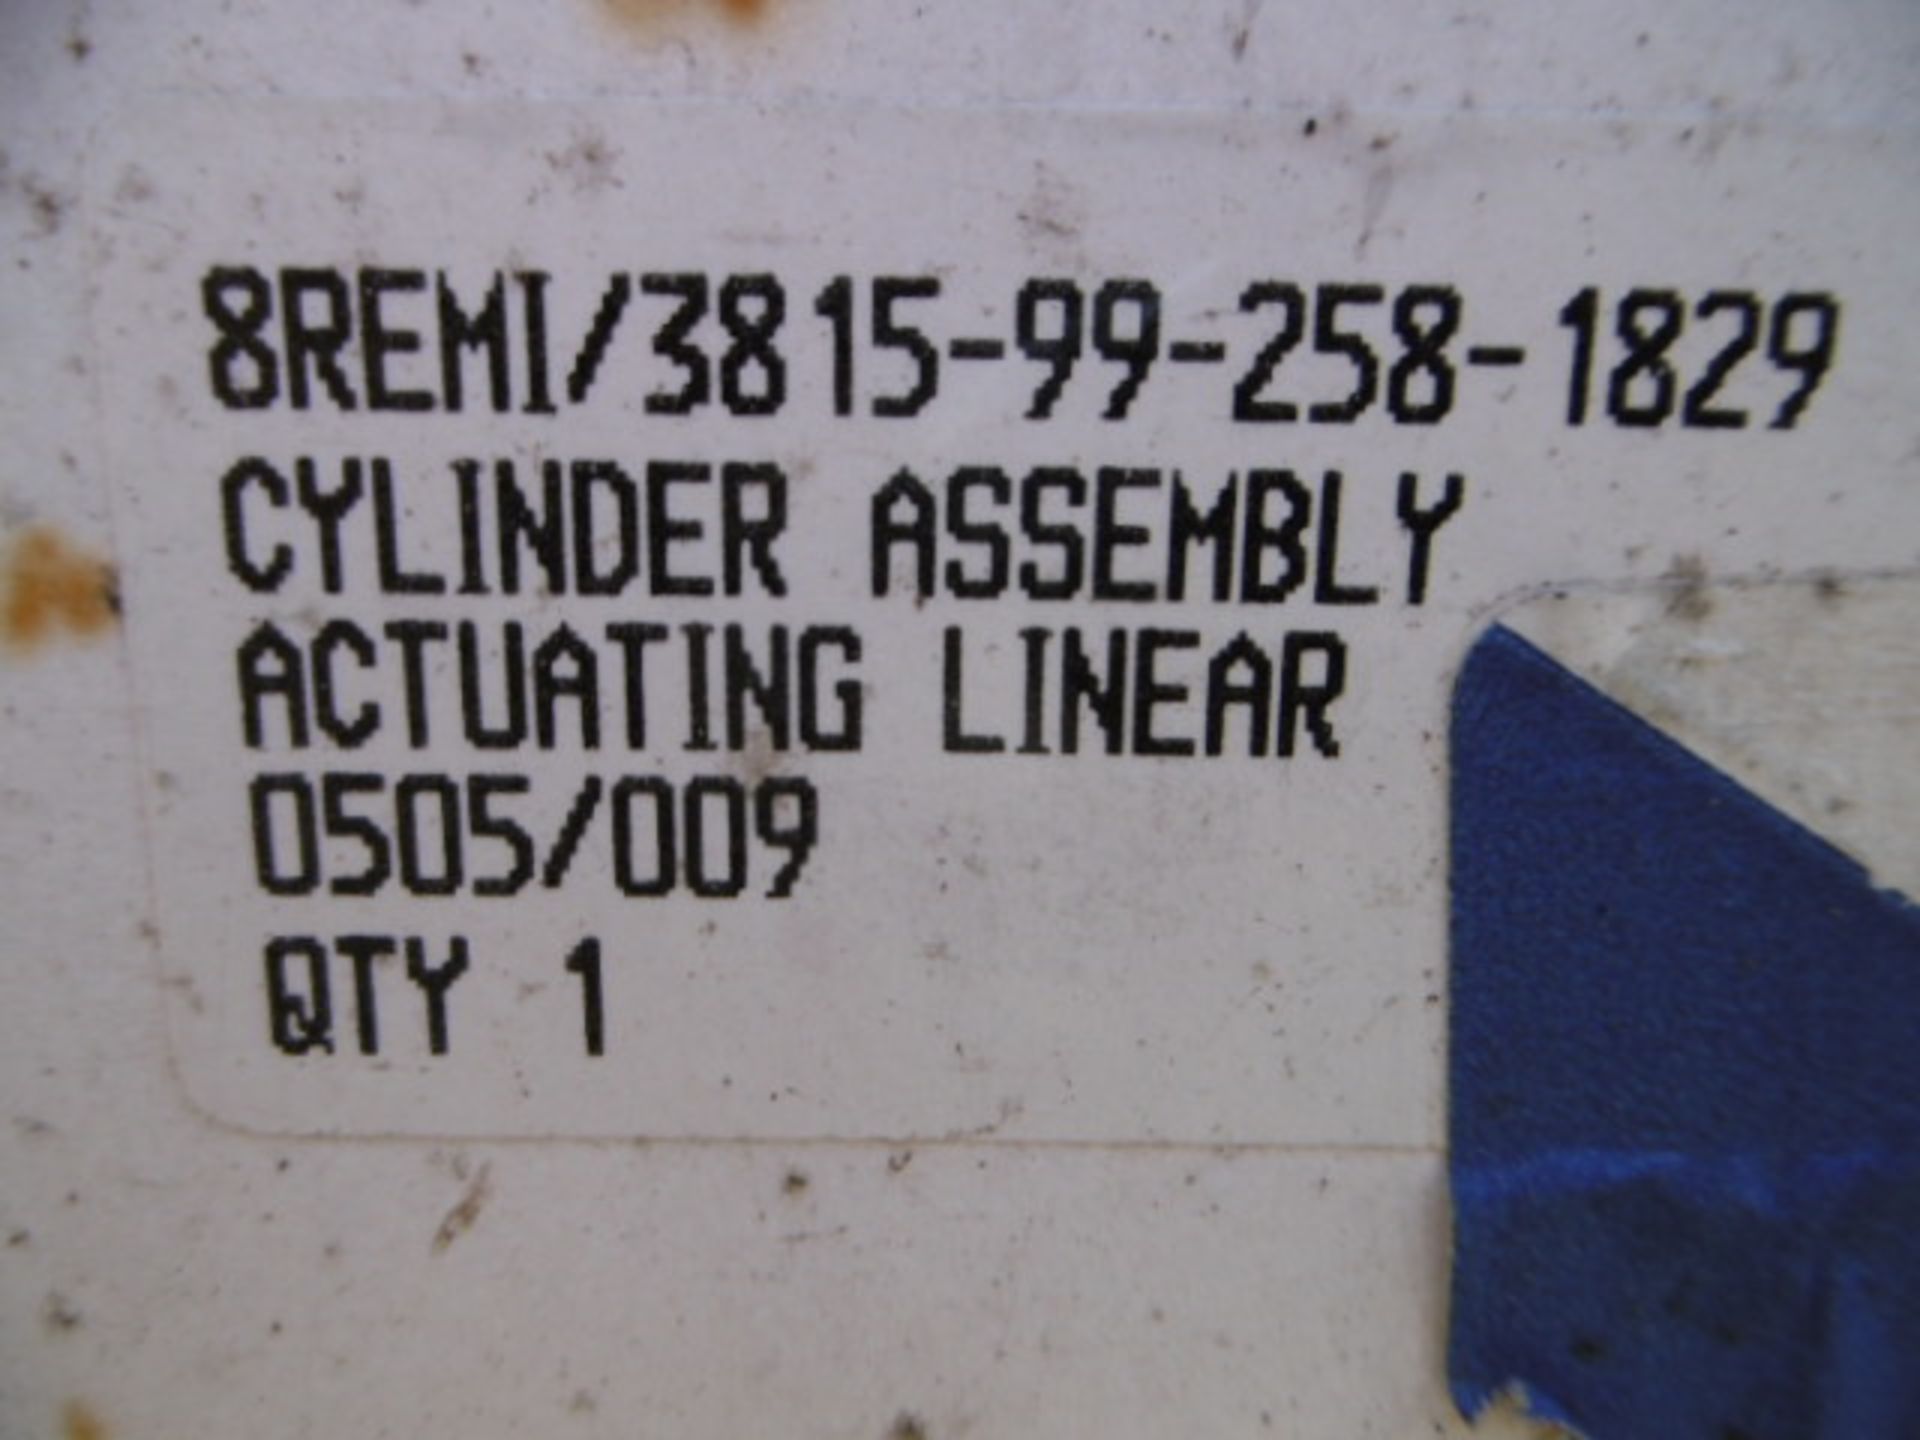 8REMI Actuating Linear Cylinder Assy - Image 4 of 4